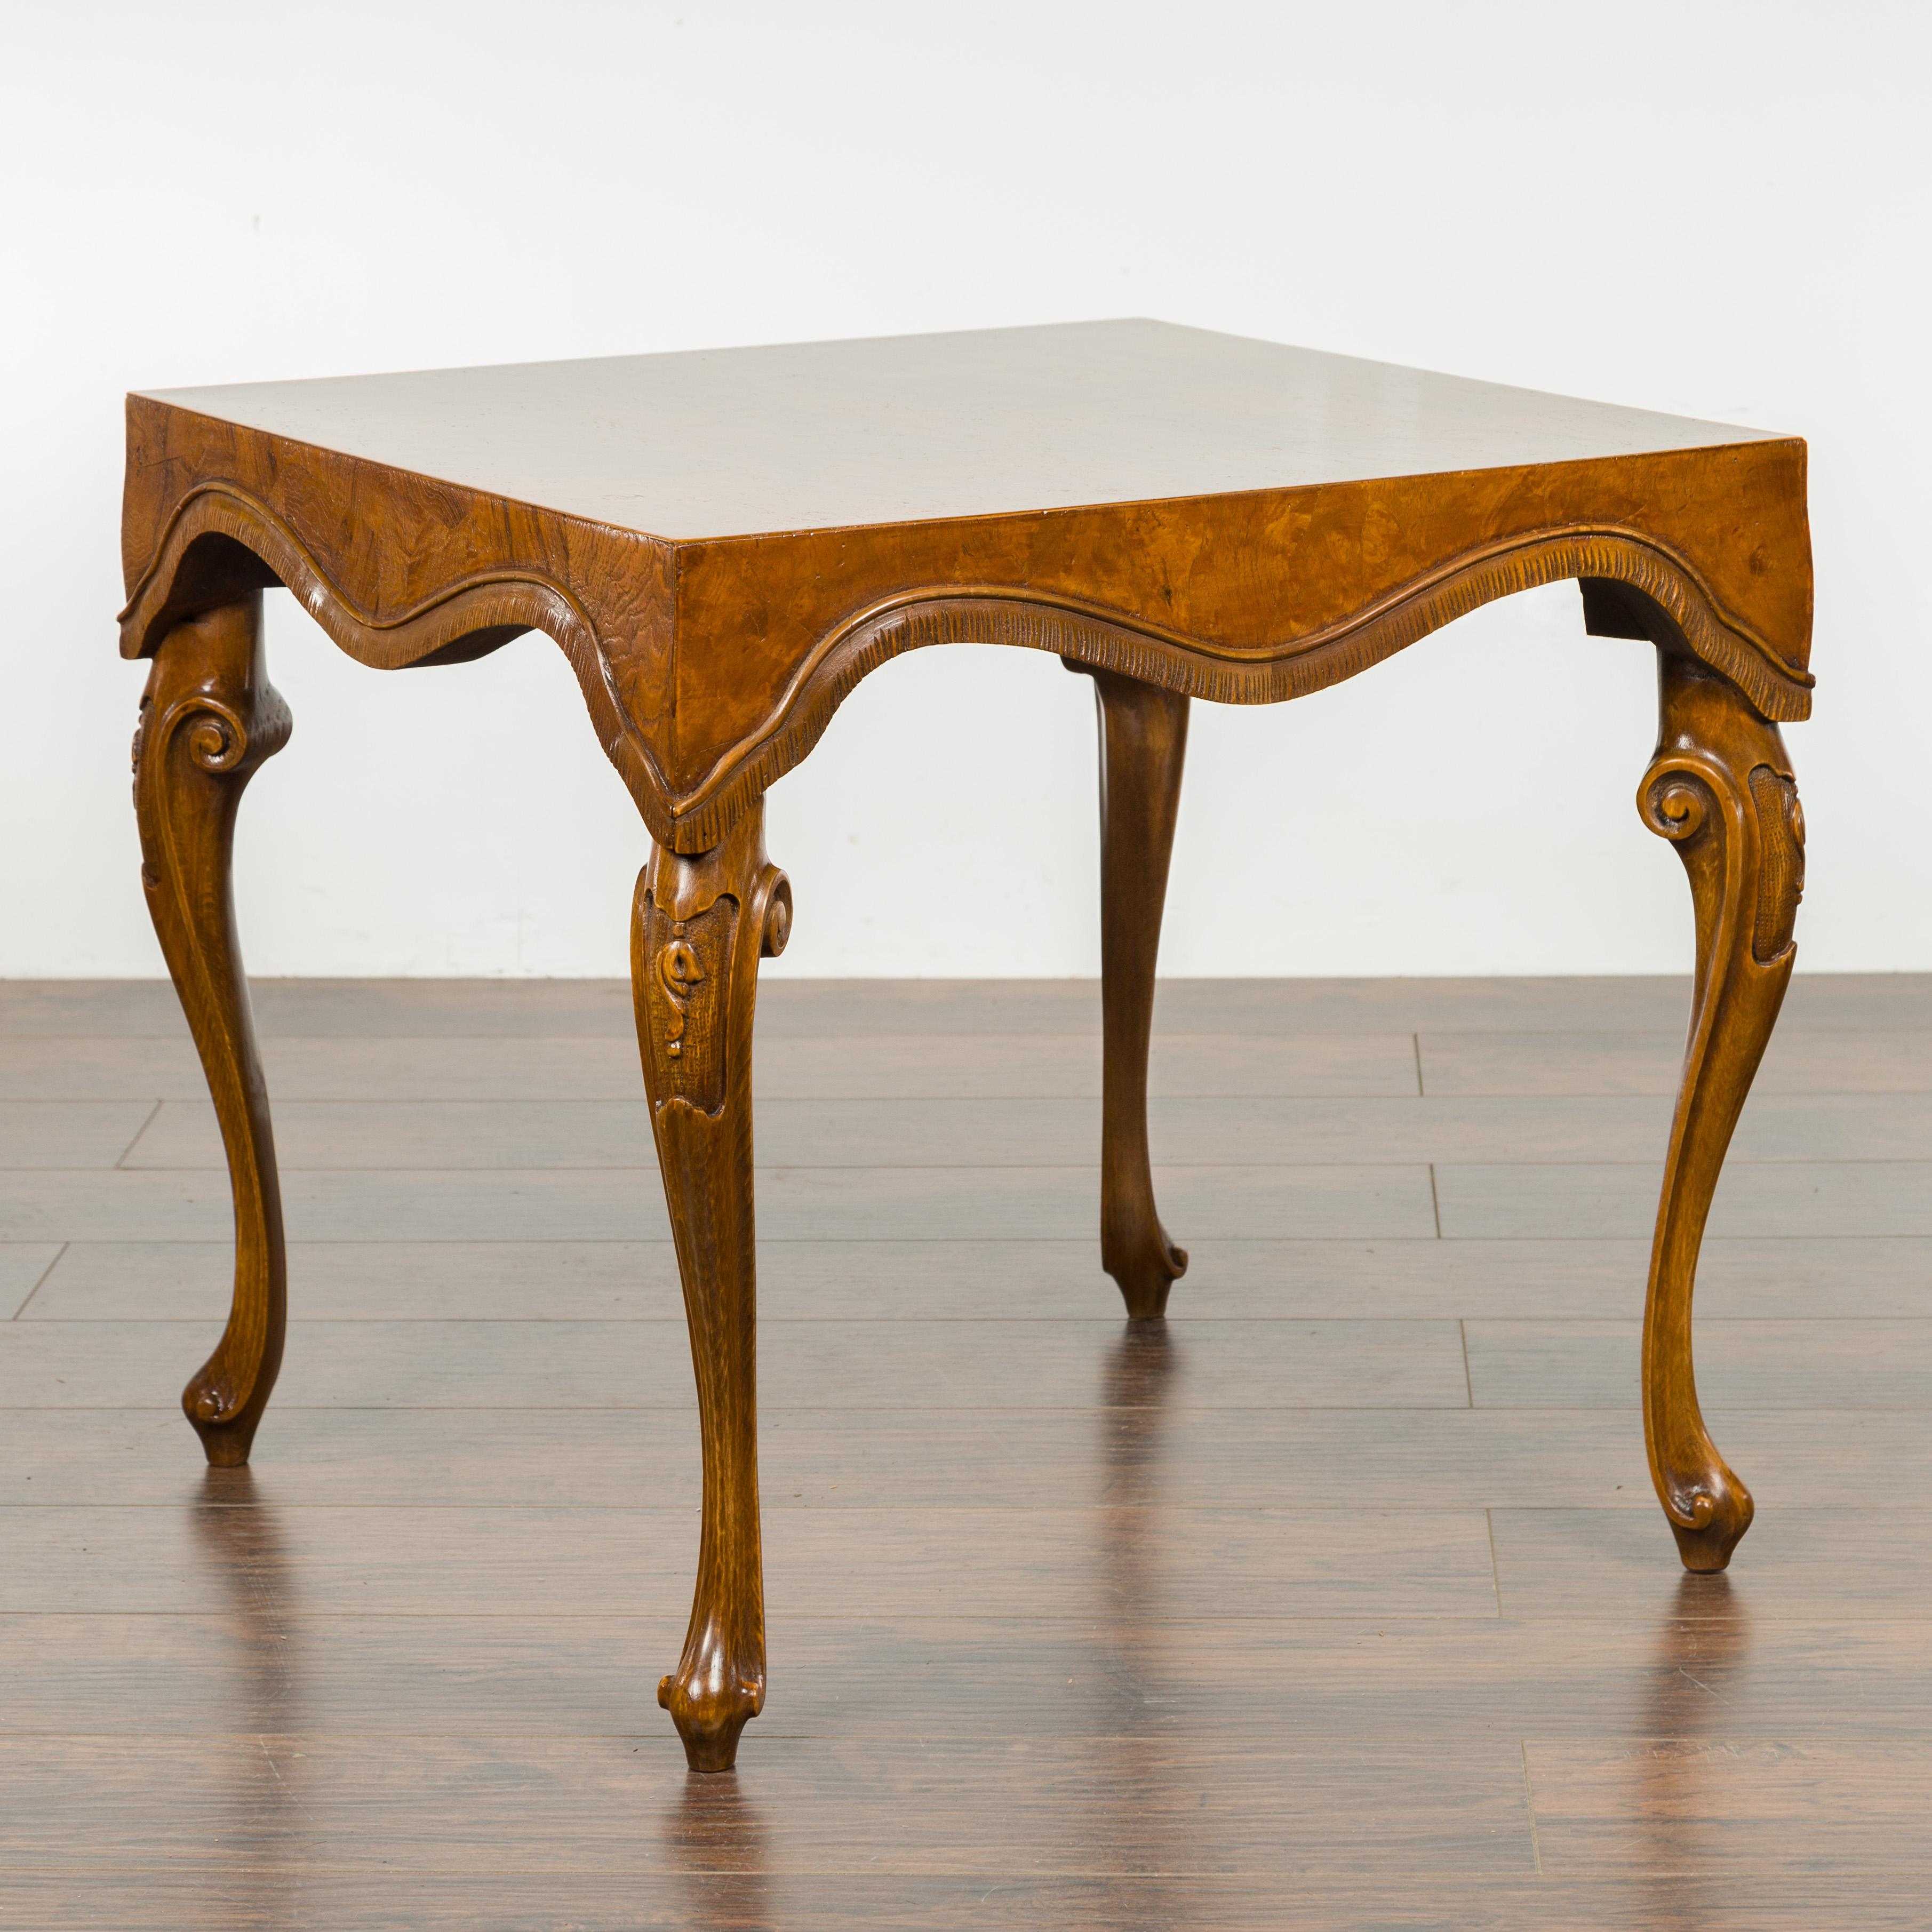 Italian Rococo Style Midcentury Walnut and Olive Wood Table with Cabriole Legs For Sale 3